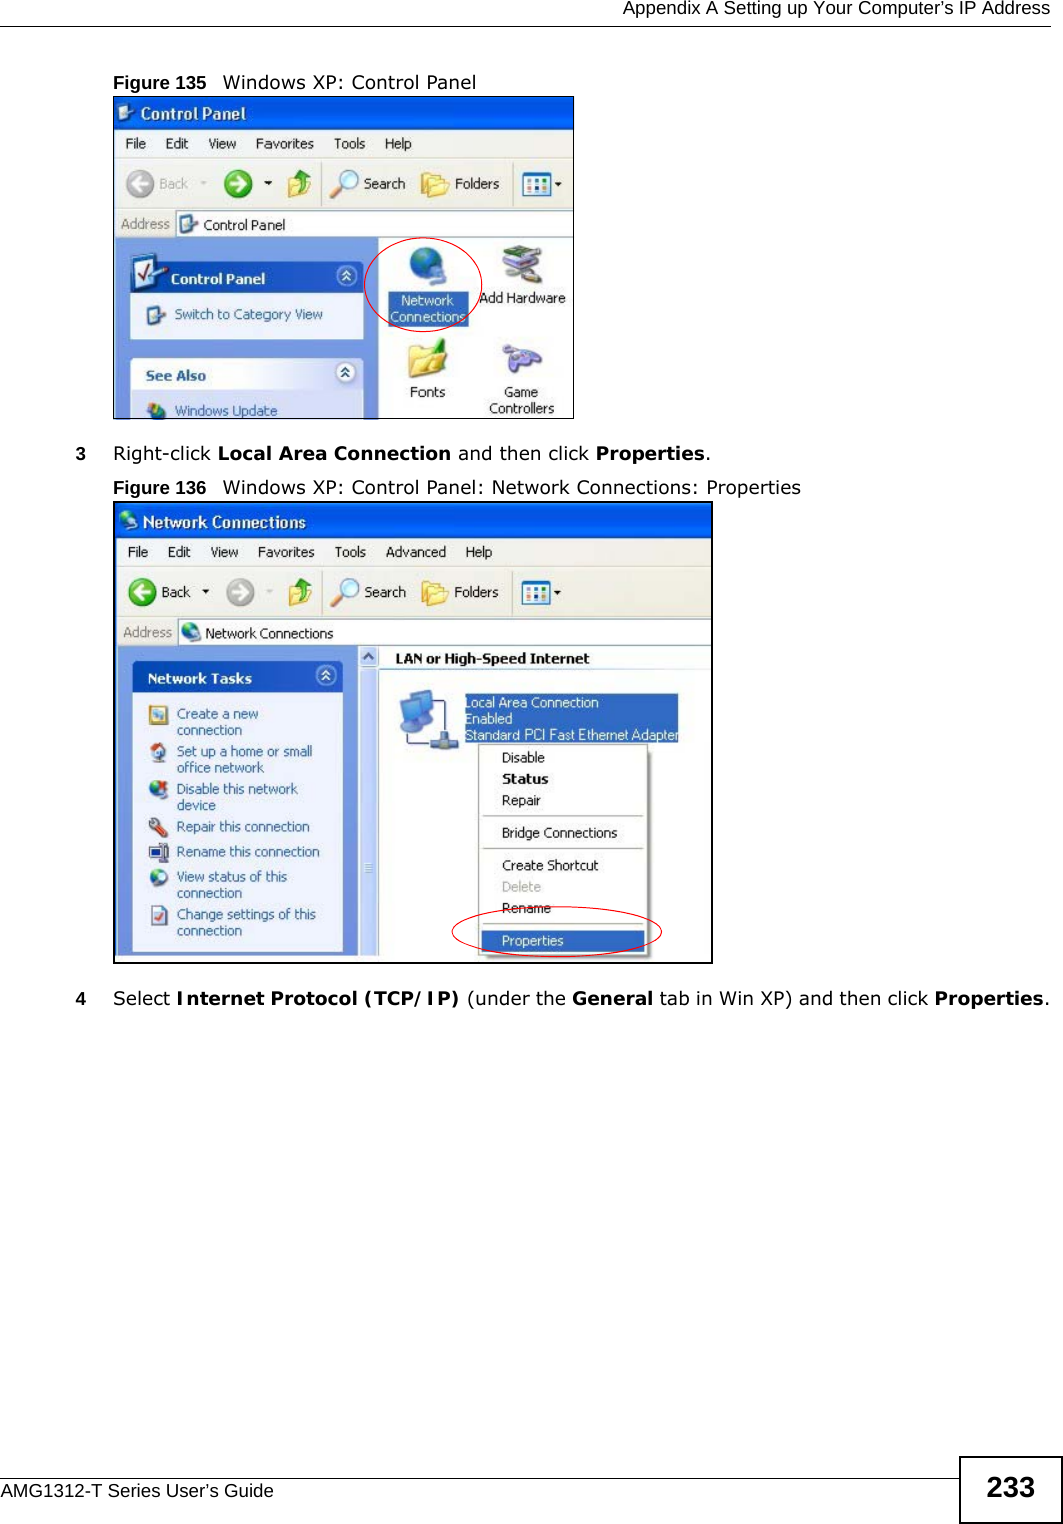  Appendix A Setting up Your Computer’s IP AddressAMG1312-T Series User’s Guide 233Figure 135   Windows XP: Control Panel3Right-click Local Area Connection and then click Properties.Figure 136   Windows XP: Control Panel: Network Connections: Properties4Select Internet Protocol (TCP/IP) (under the General tab in Win XP) and then click Properties.